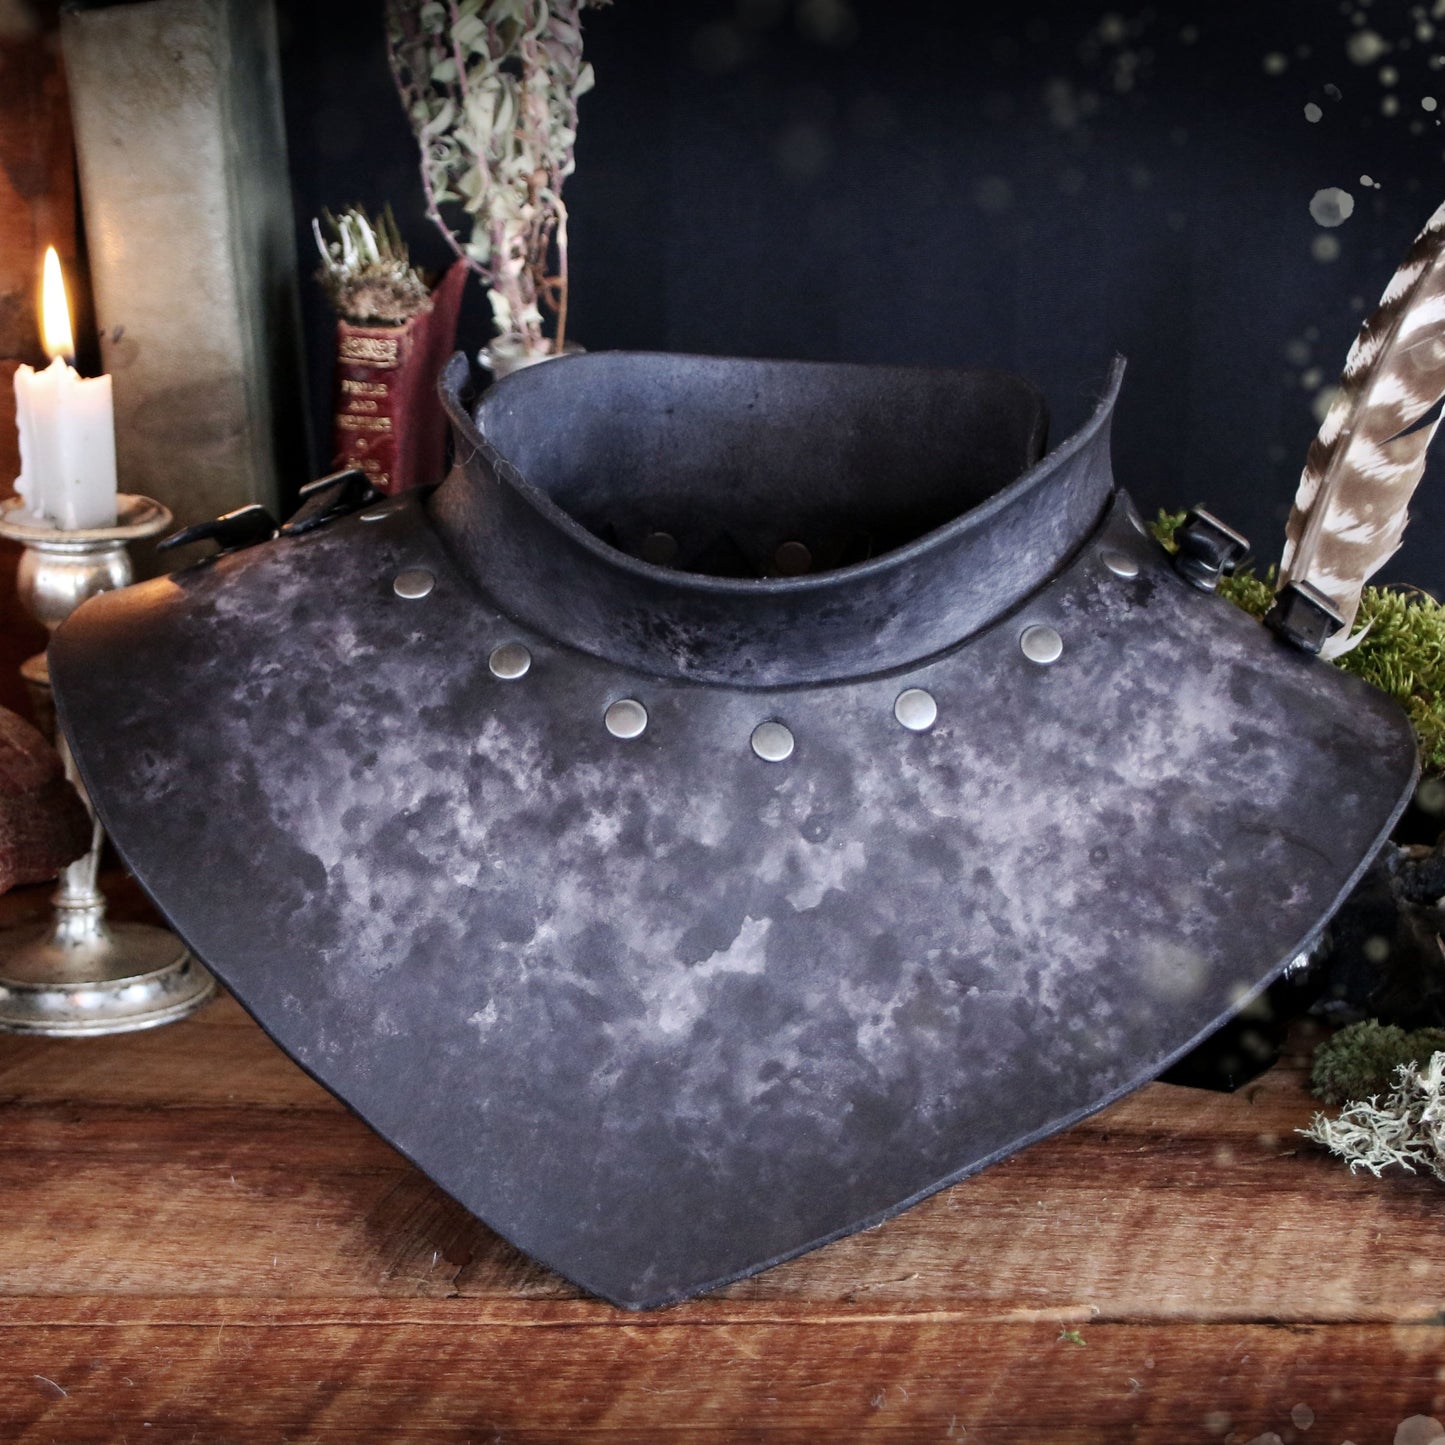 The Wanderer's Gorget